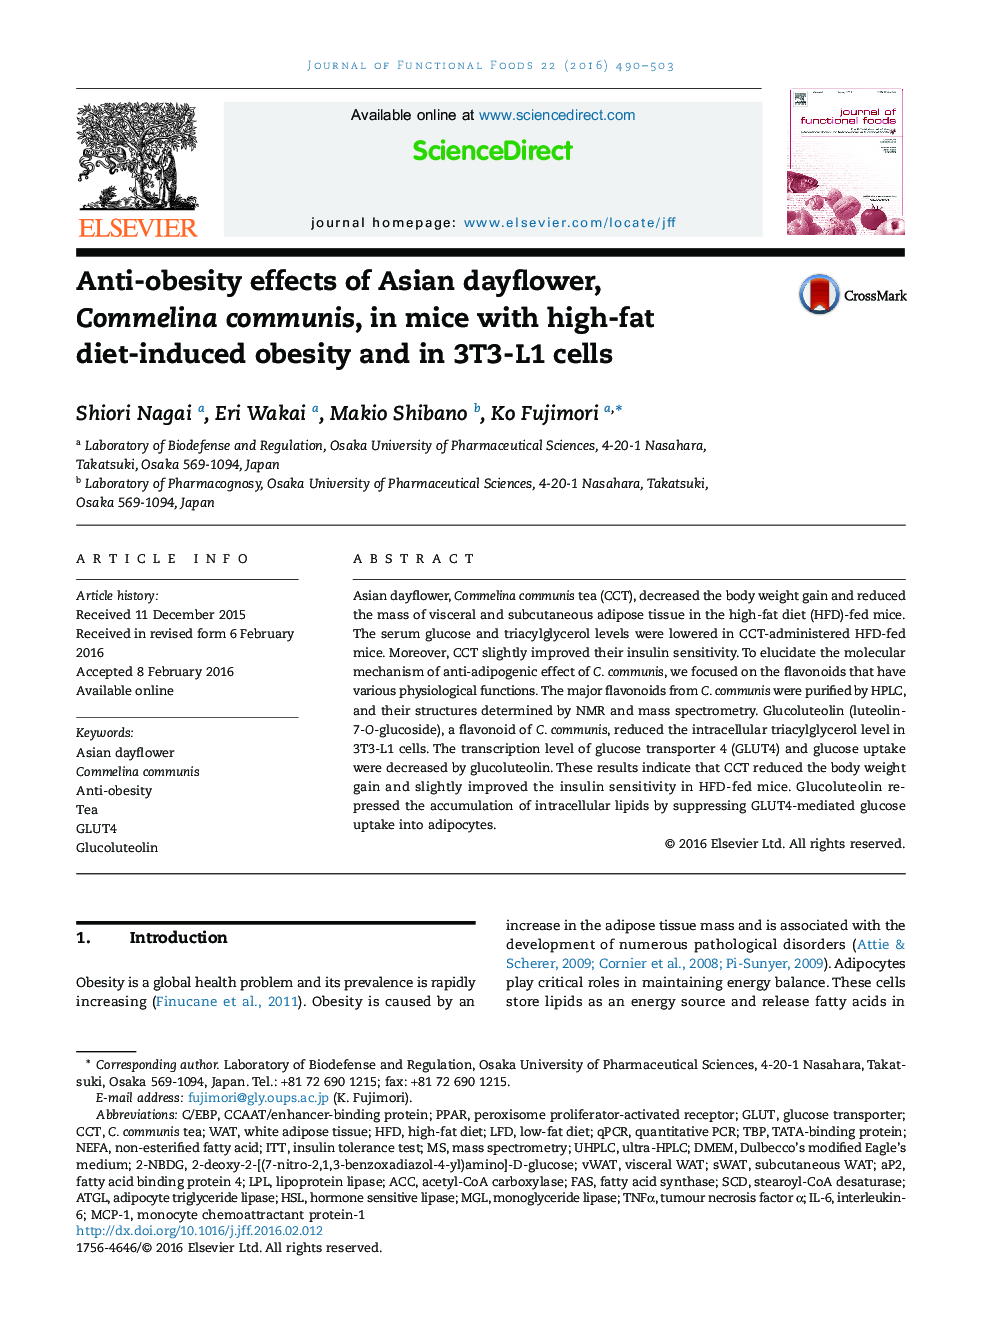 Anti-obesity effects of Asian dayflower, Commelina communis, in mice with high-fat diet-induced obesity and in 3T3-L1 cells